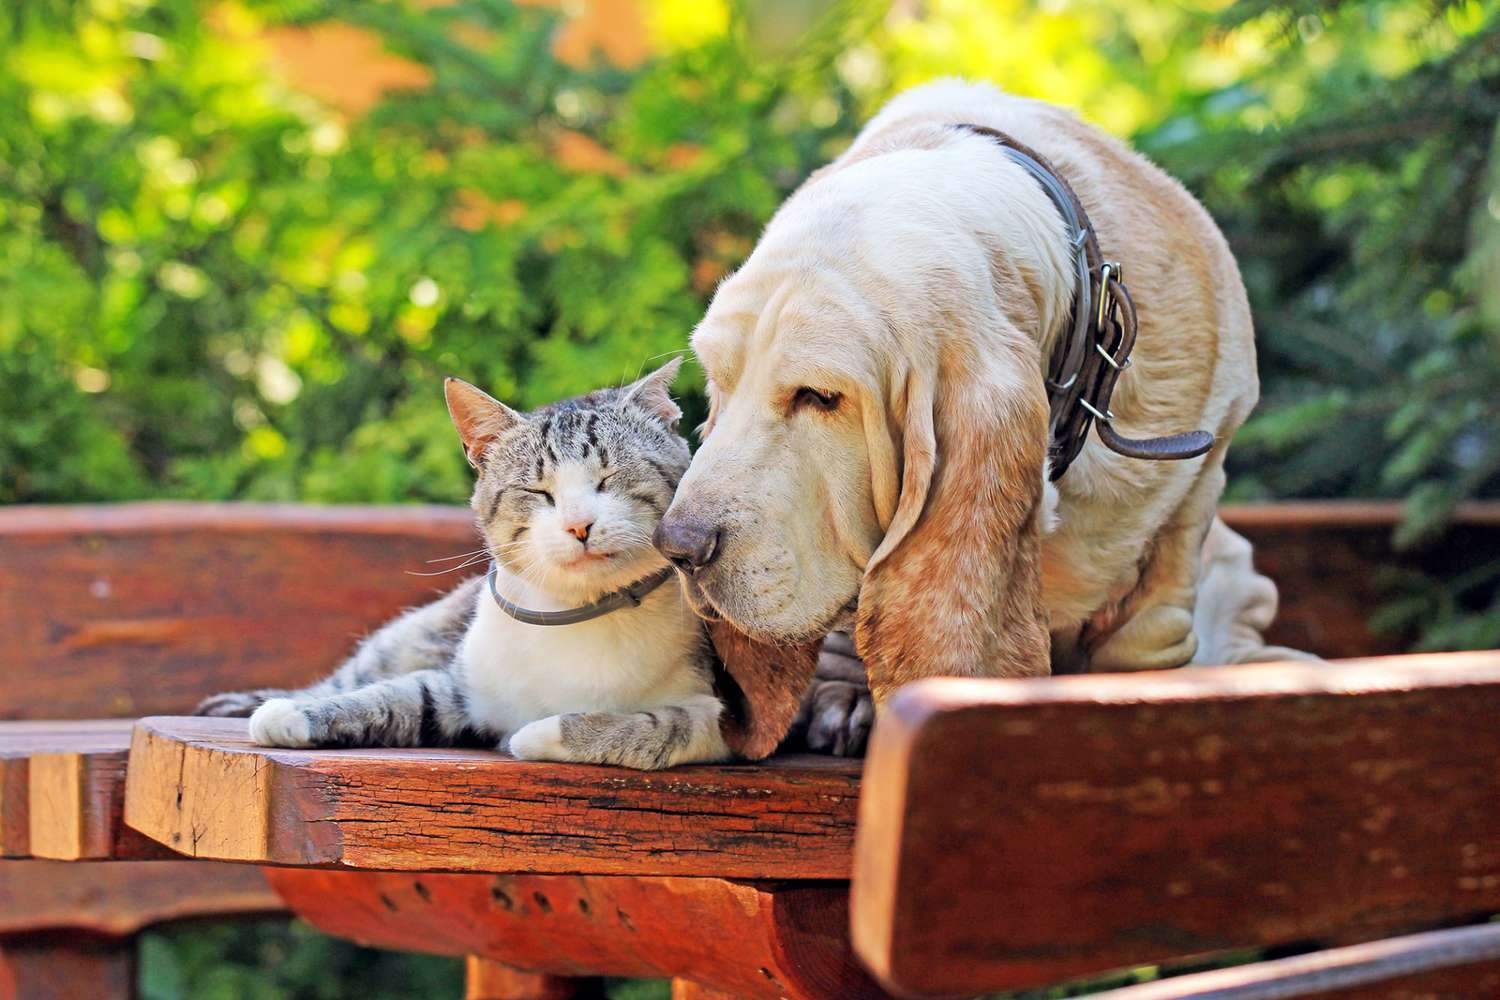 Basset hound and cat snuggling outside